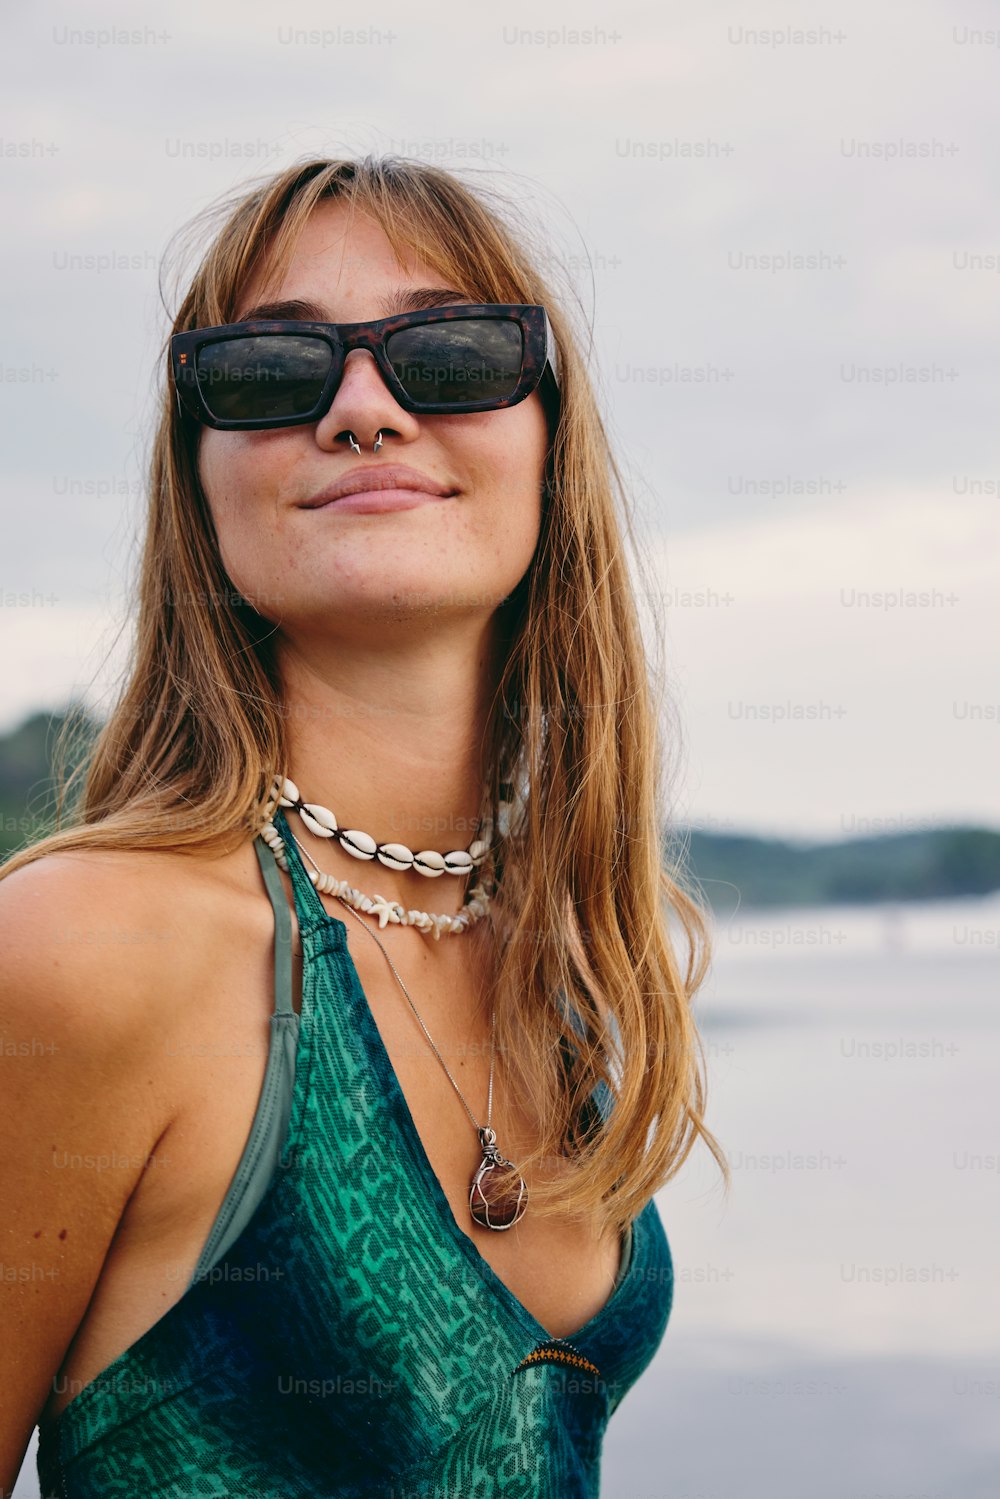 a woman wearing sunglasses standing next to a body of water